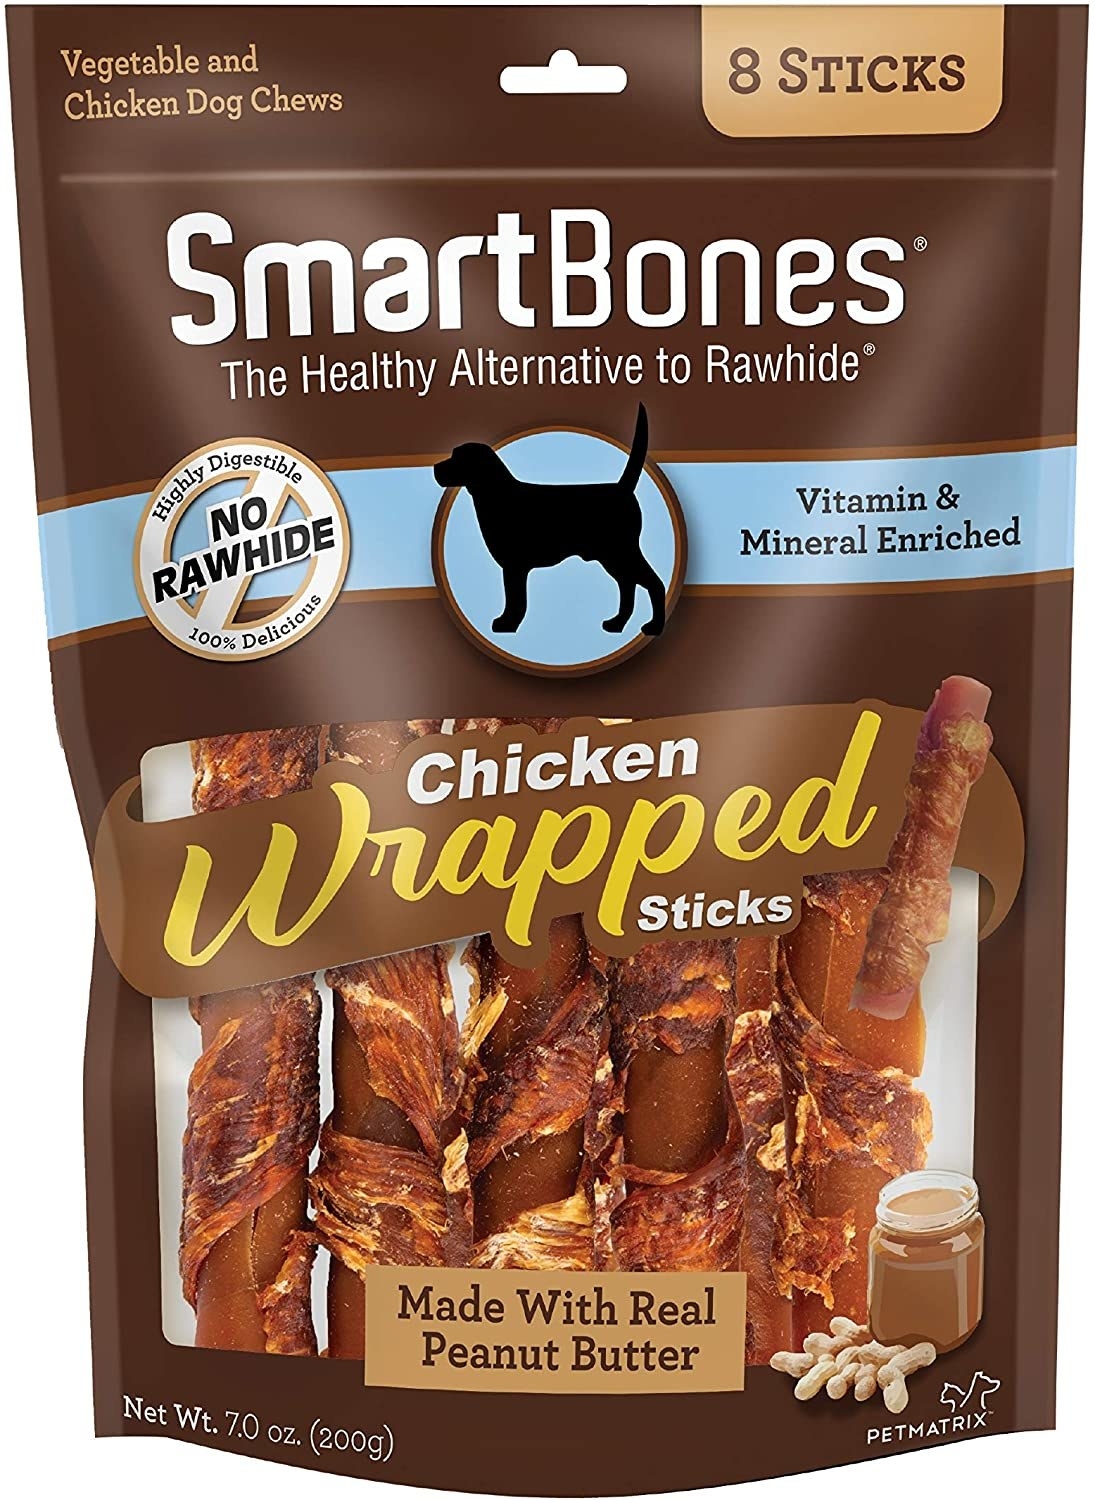 The bag of peanut butter, chicken-wrapped sticks